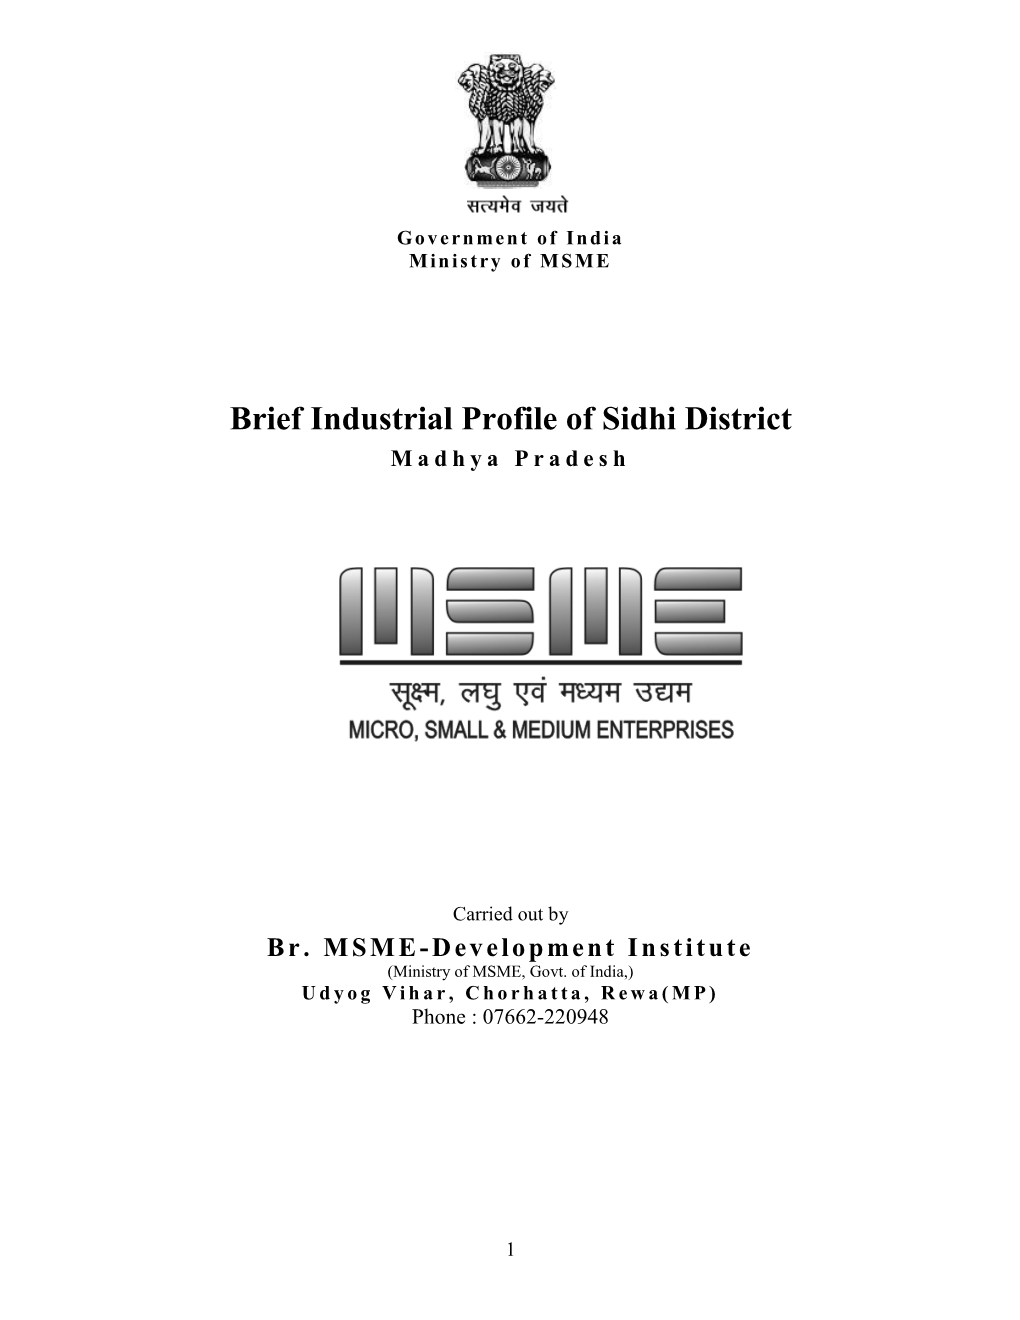 Brief Industrial Profile of Sidhi District